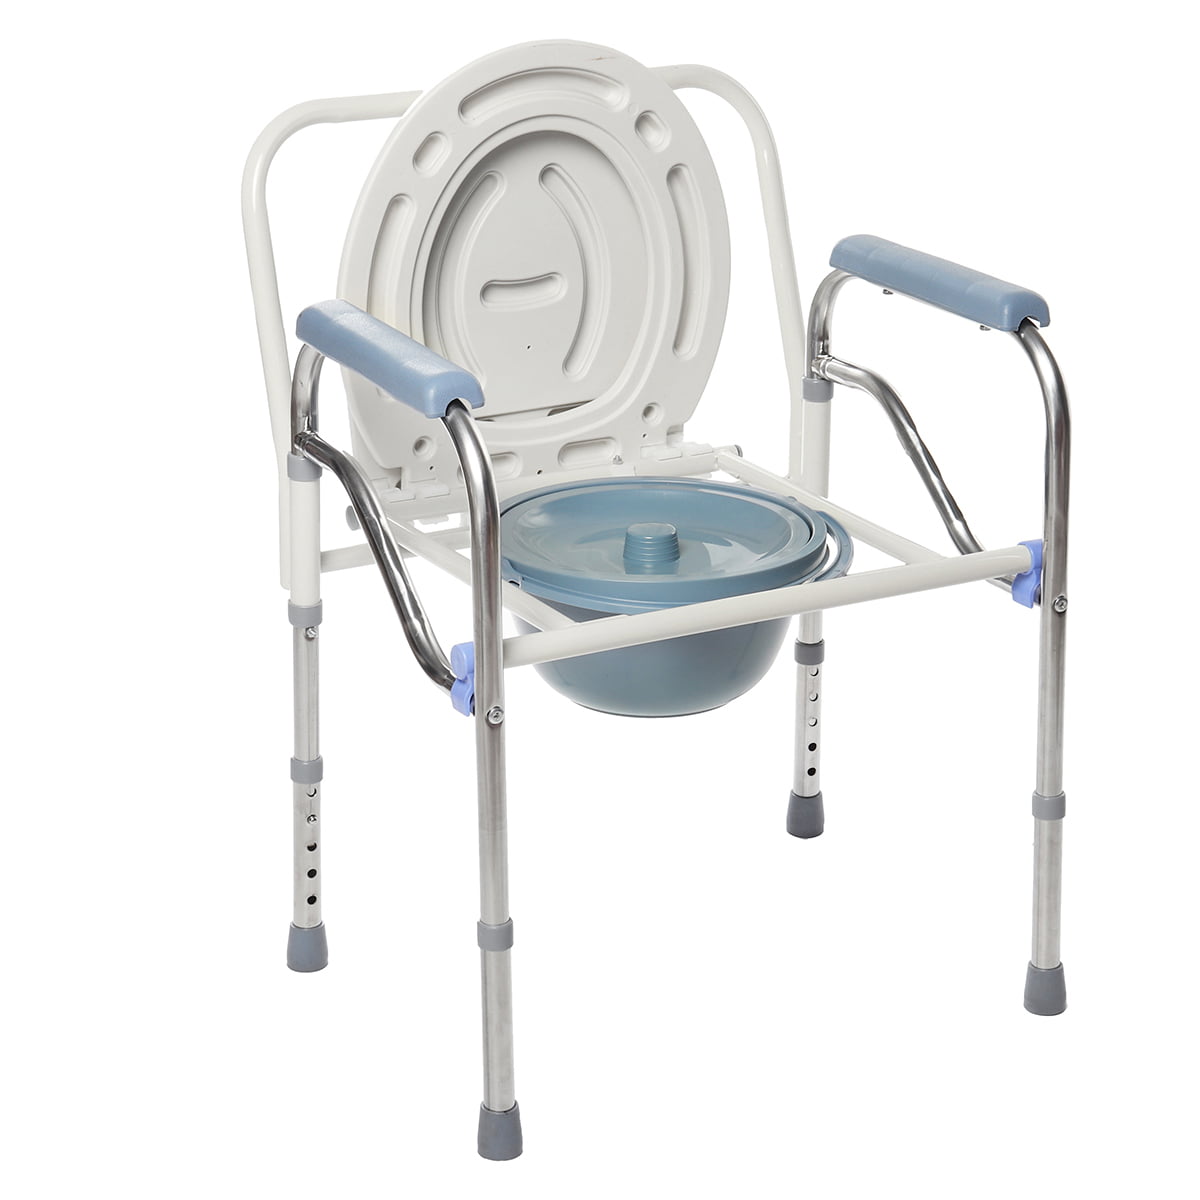 3 in 1 Stainless Steel Folding Portable Toilet, Commode Chair Safety